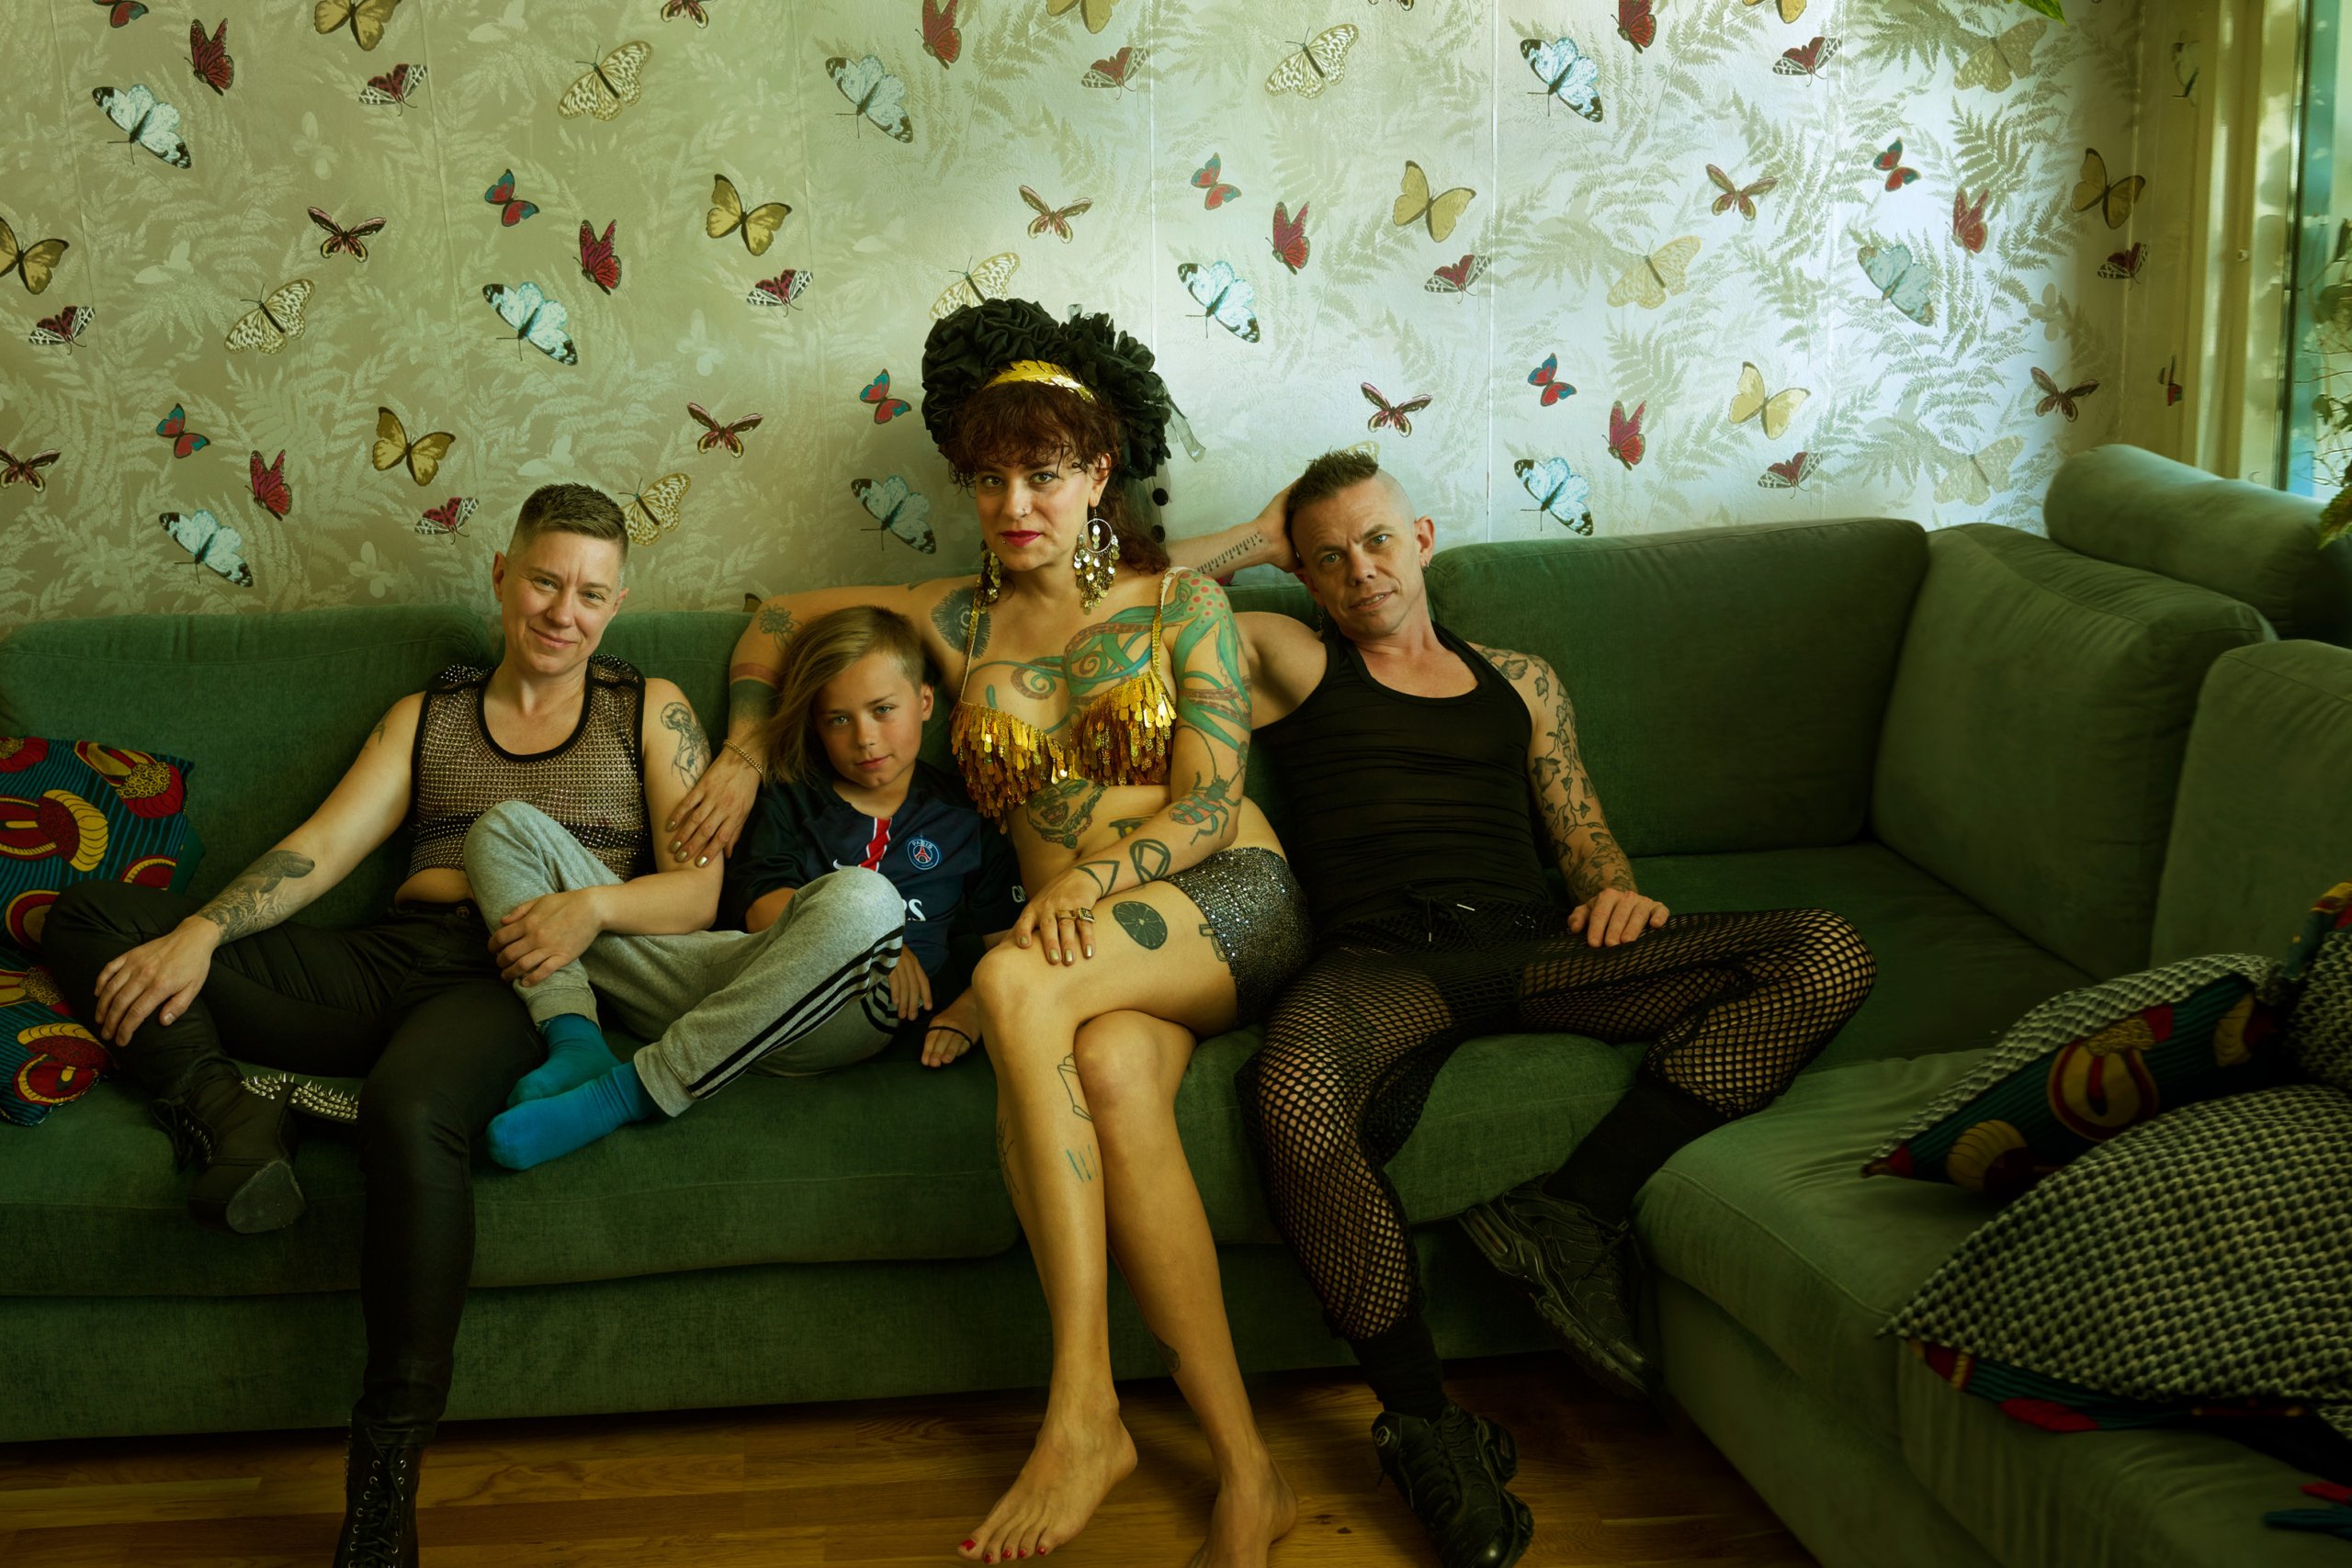 Cal and their family sitting in a green sofa in their living room.